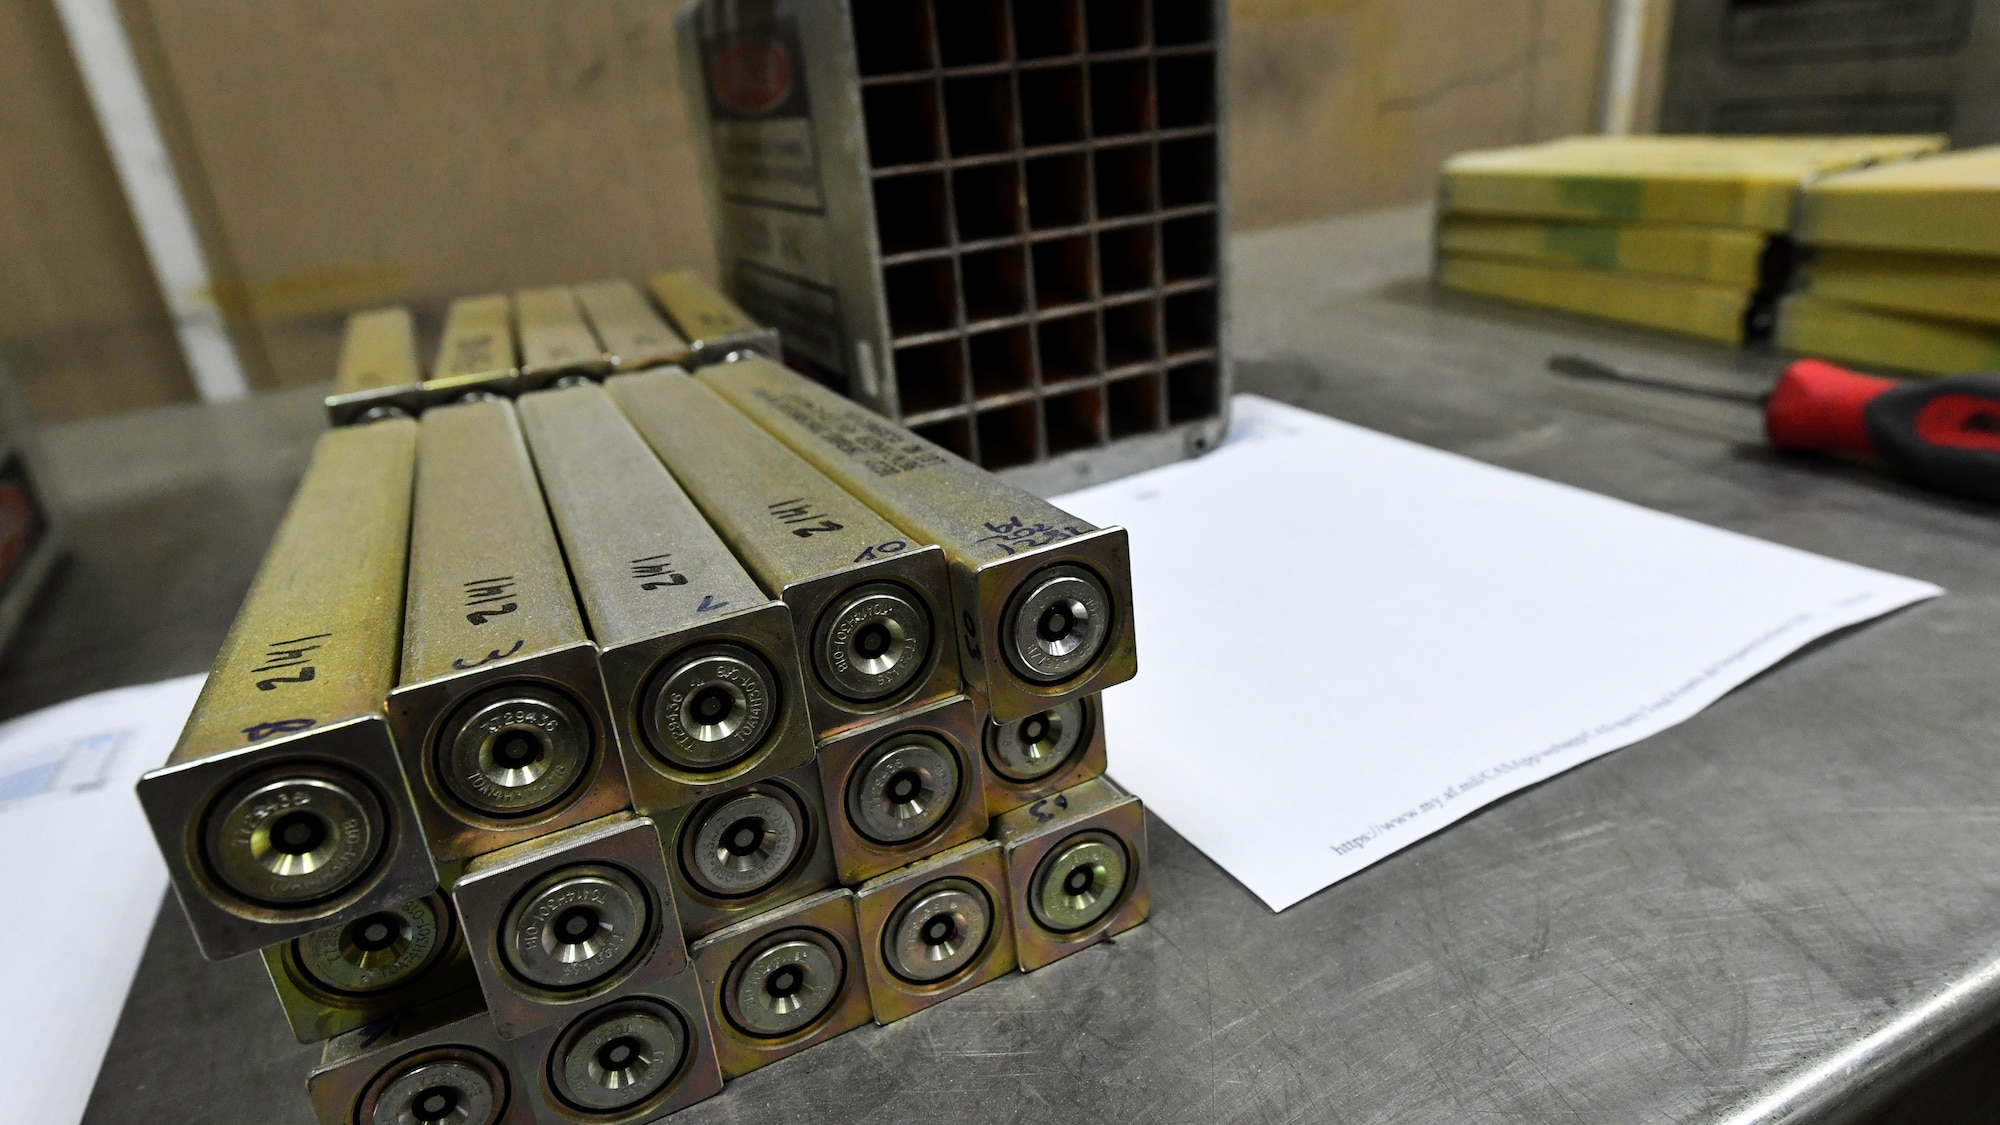 Aircraft flares await inspection and installation into a flare housing module at Ali Al Salem Air Base, Kuwait, July 18, 2019. Flares and chaff are routinely inspected to verify expiration dates, guaranteeing proper functionality in the event countermeasures are needed during operations. (U.S. Air Force photo by Staff. Sgt. Mozer O. Da Cunha)